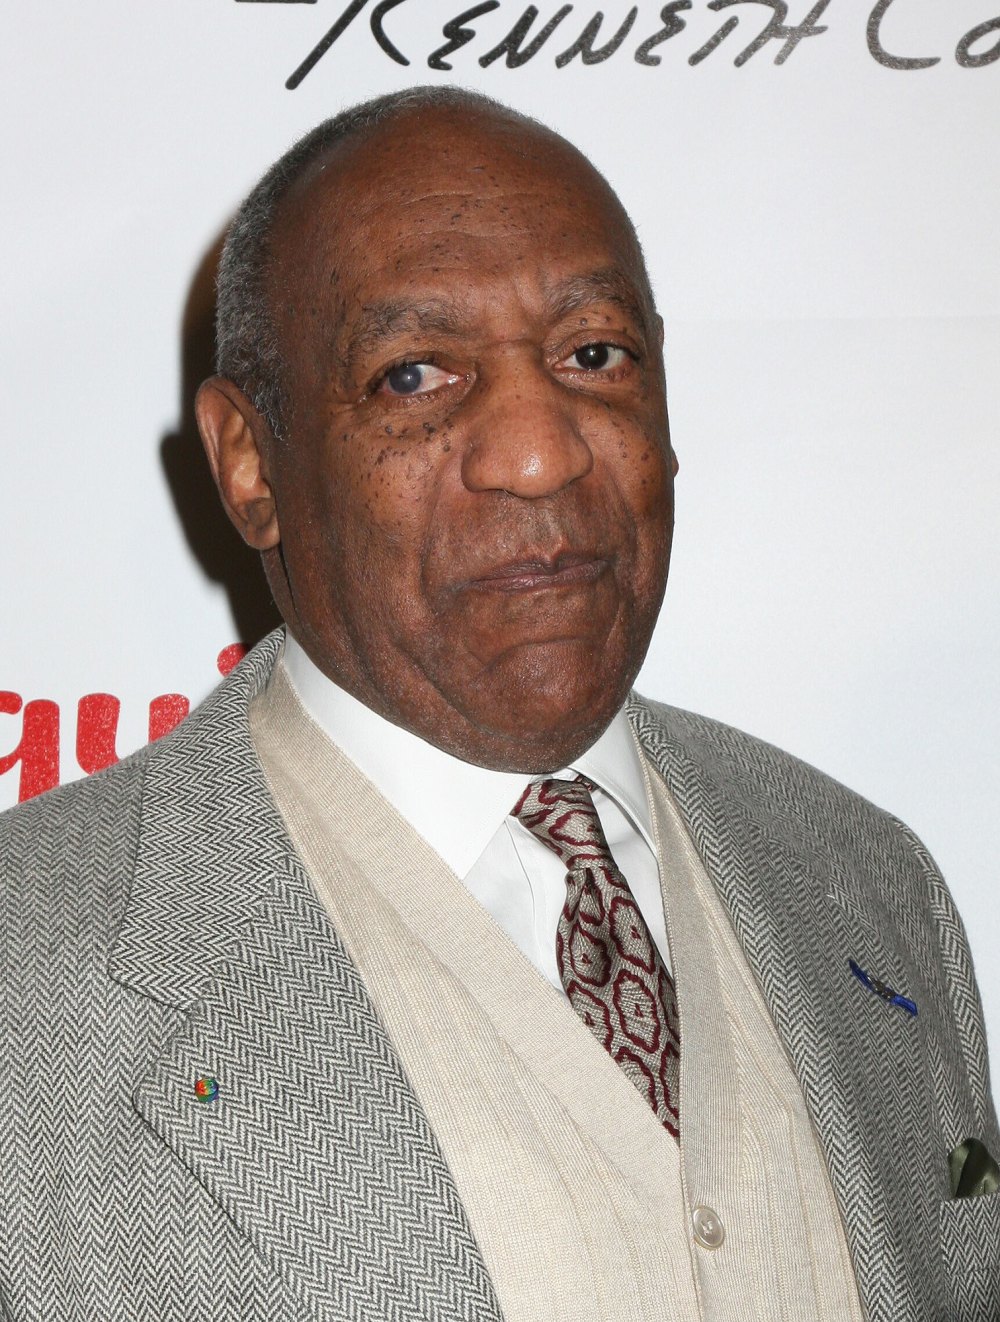 Bill Cosby Not Dead, Victim of Internet Death Hoax